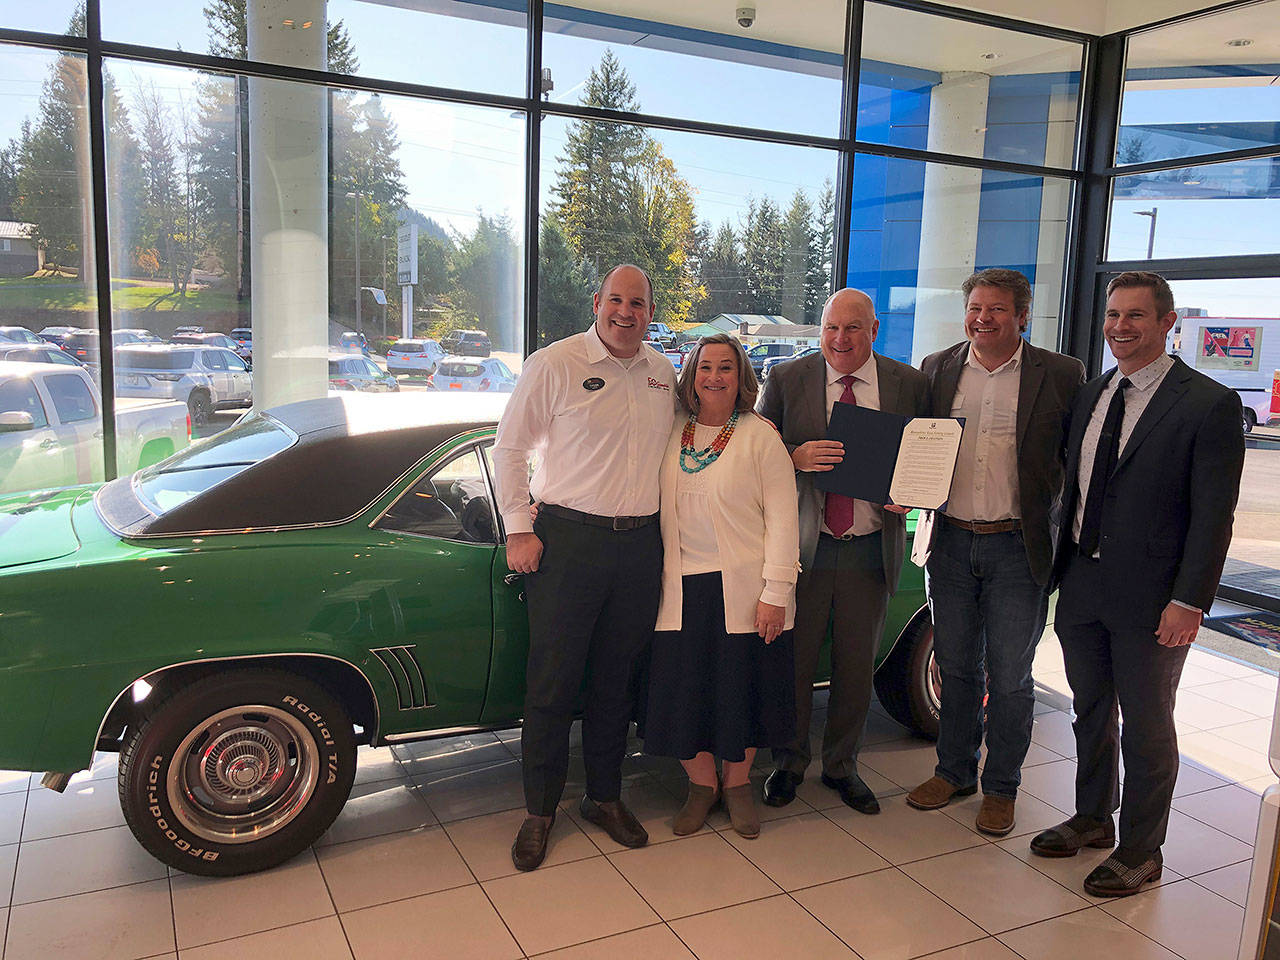 Alan Gamblin, center, with Jeri Gamblin and son Tyson, to the left and King County Councilmember Reagan Dunn to the right, standing in front of a 1969 Camero in commemoration of when the Gamblin dealership came to Enumclaw. Contributed photo